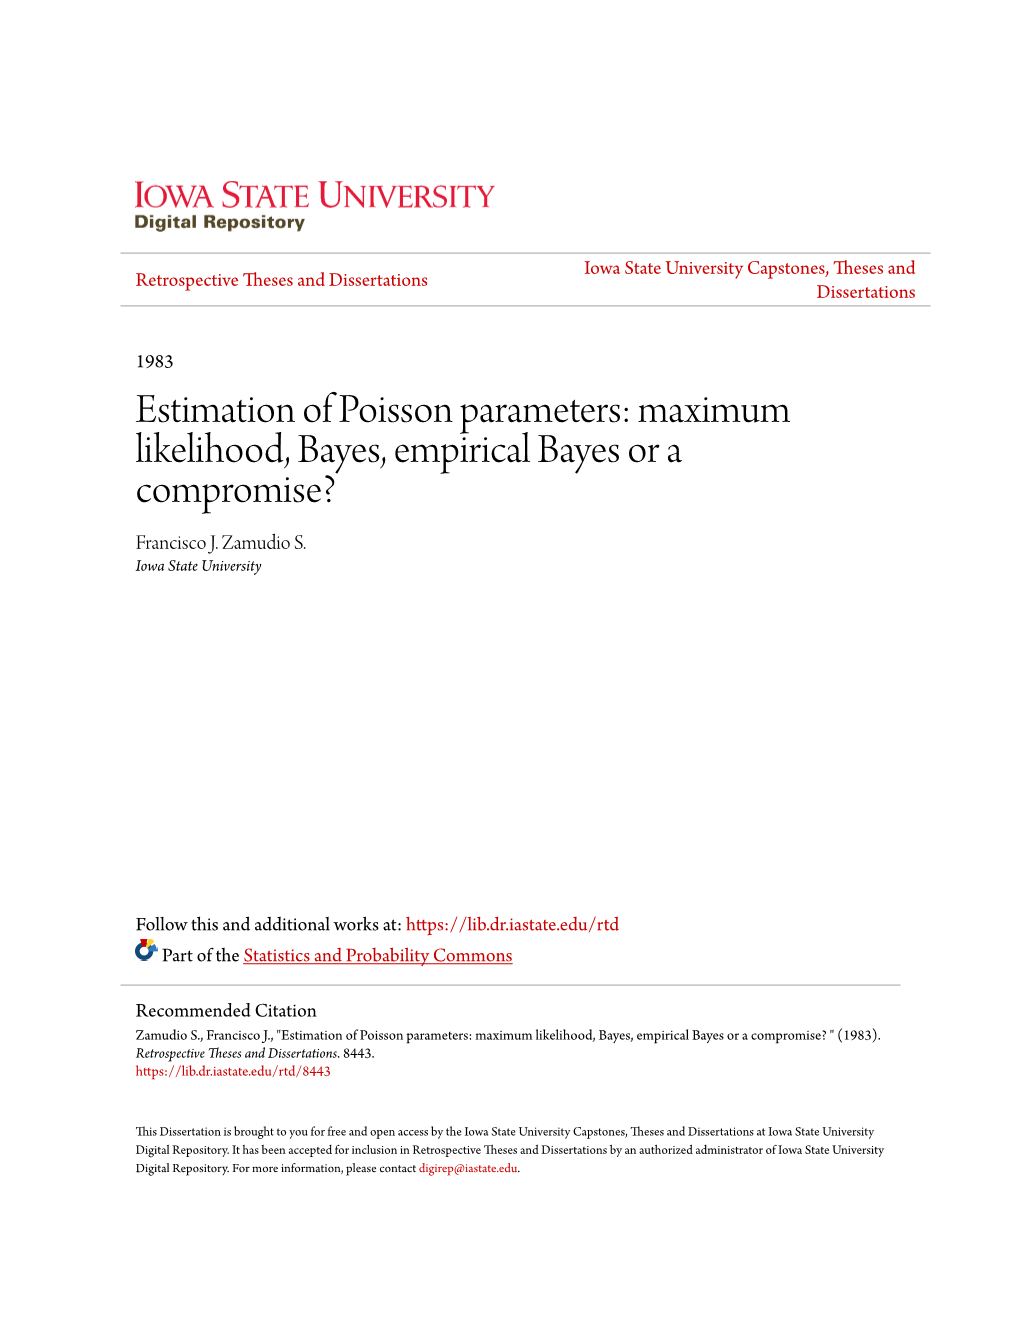 Estimation of Poisson Parameters: Maximum Likelihood, Bayes, Empirical Bayes Or a Compromise? Francisco J